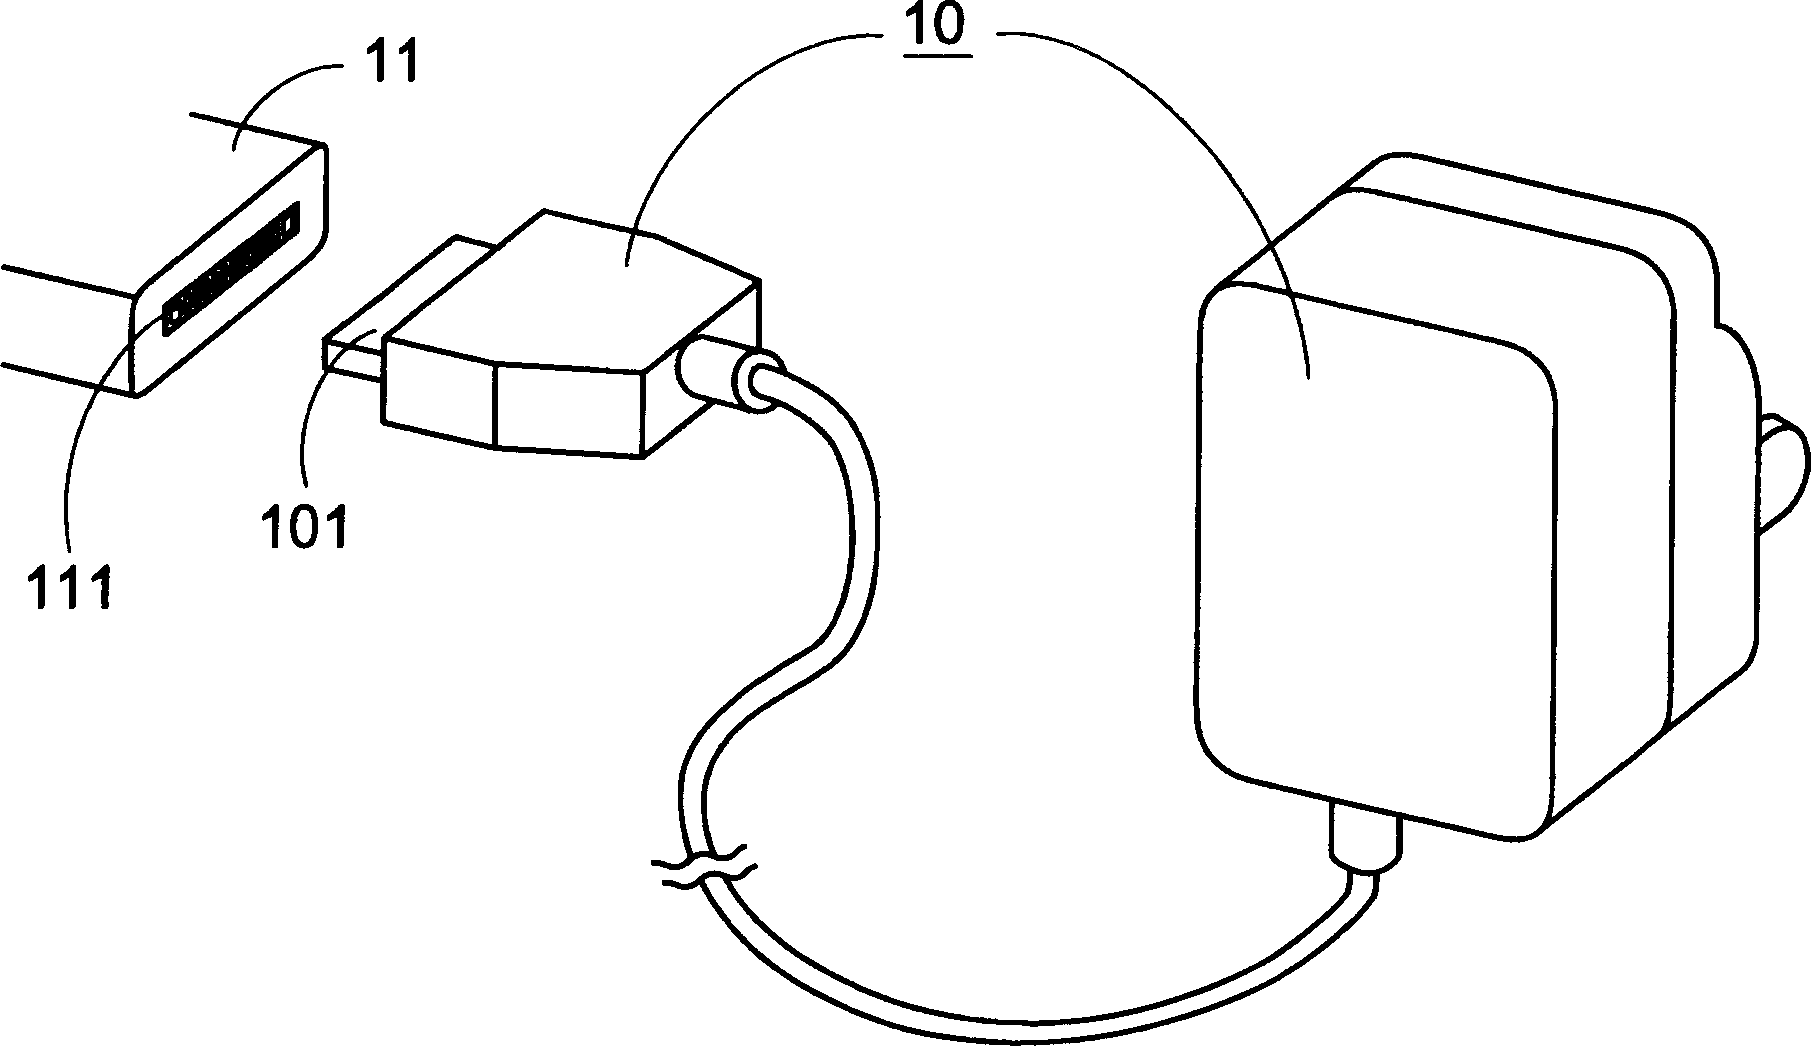 Power supply adapter for portable electronic device